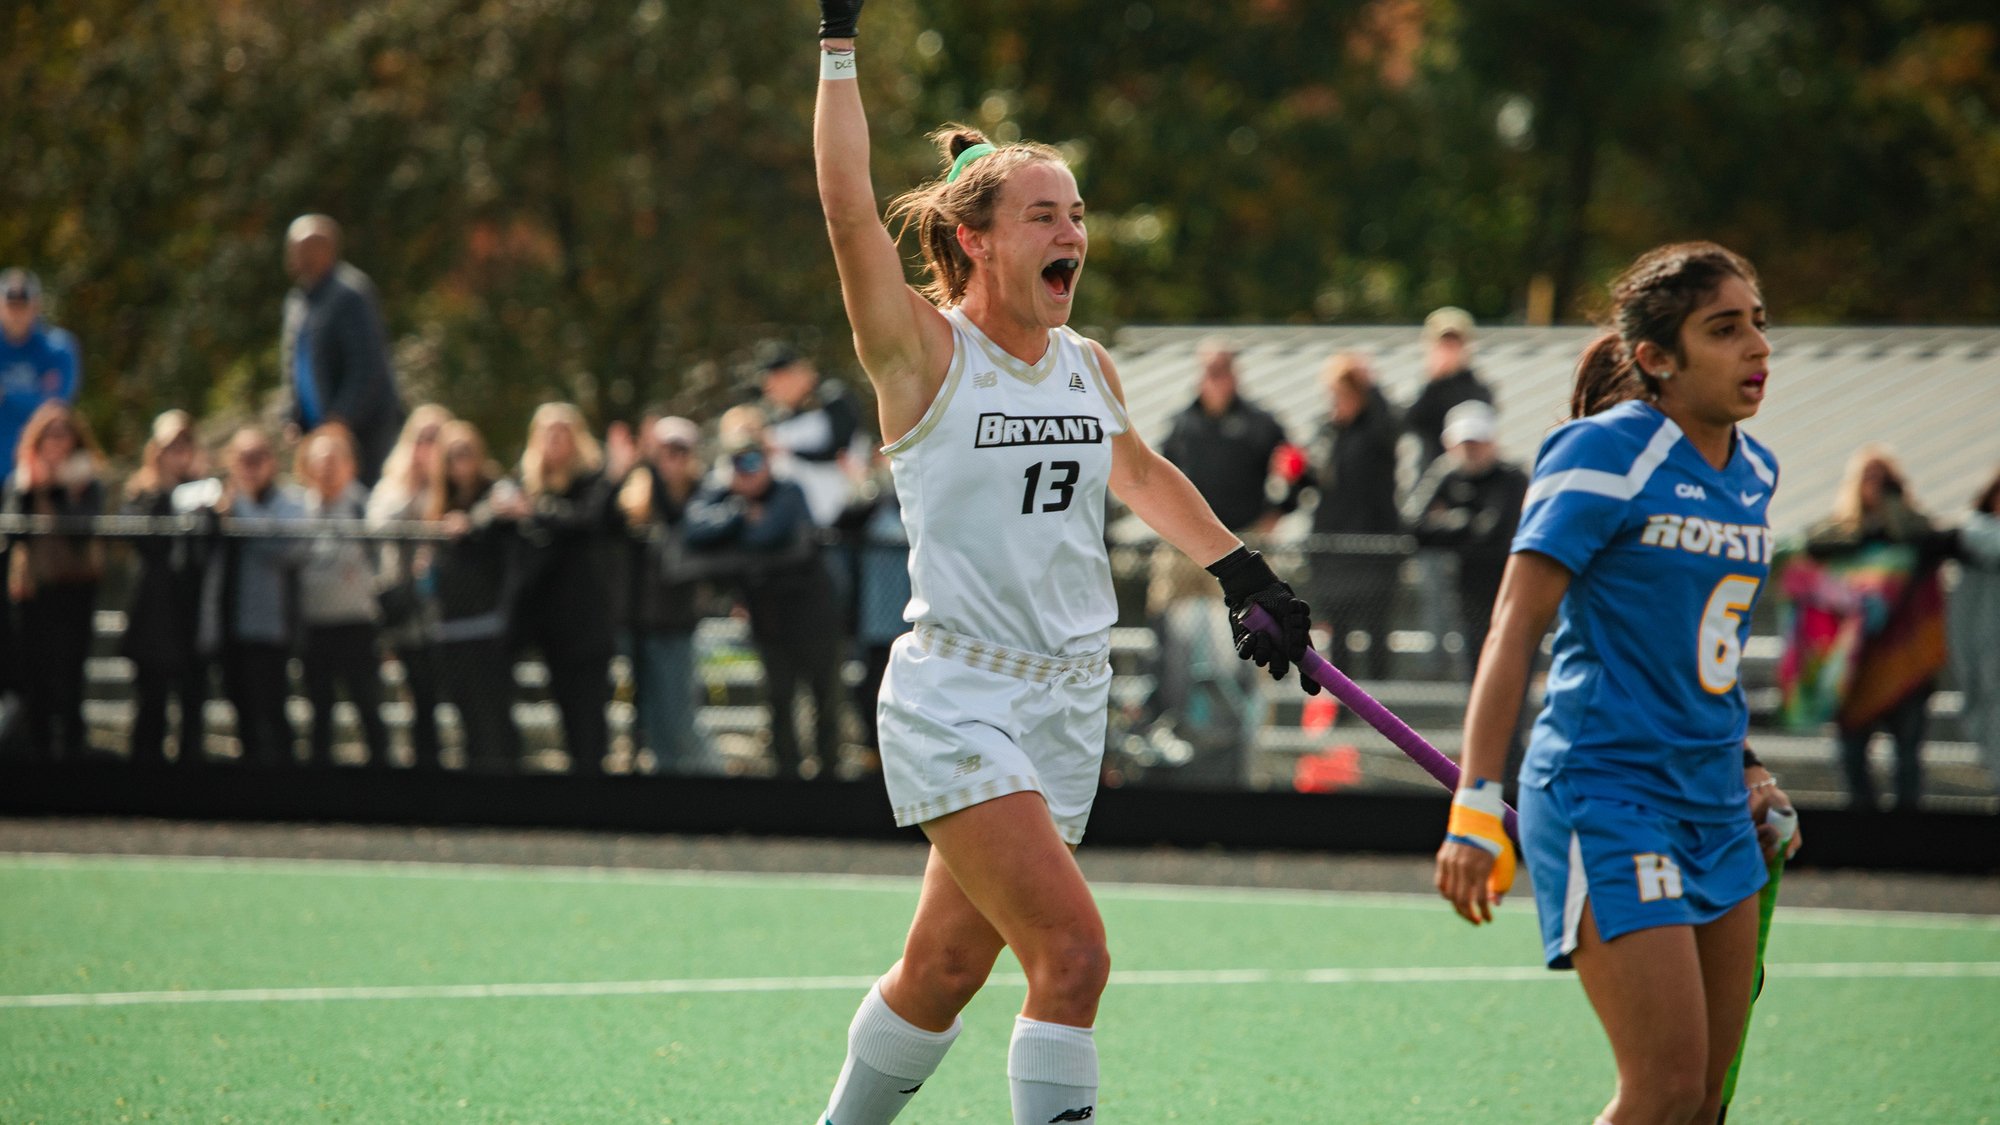 Bryant blanks Stanford, 2-0, for first-ever America East win